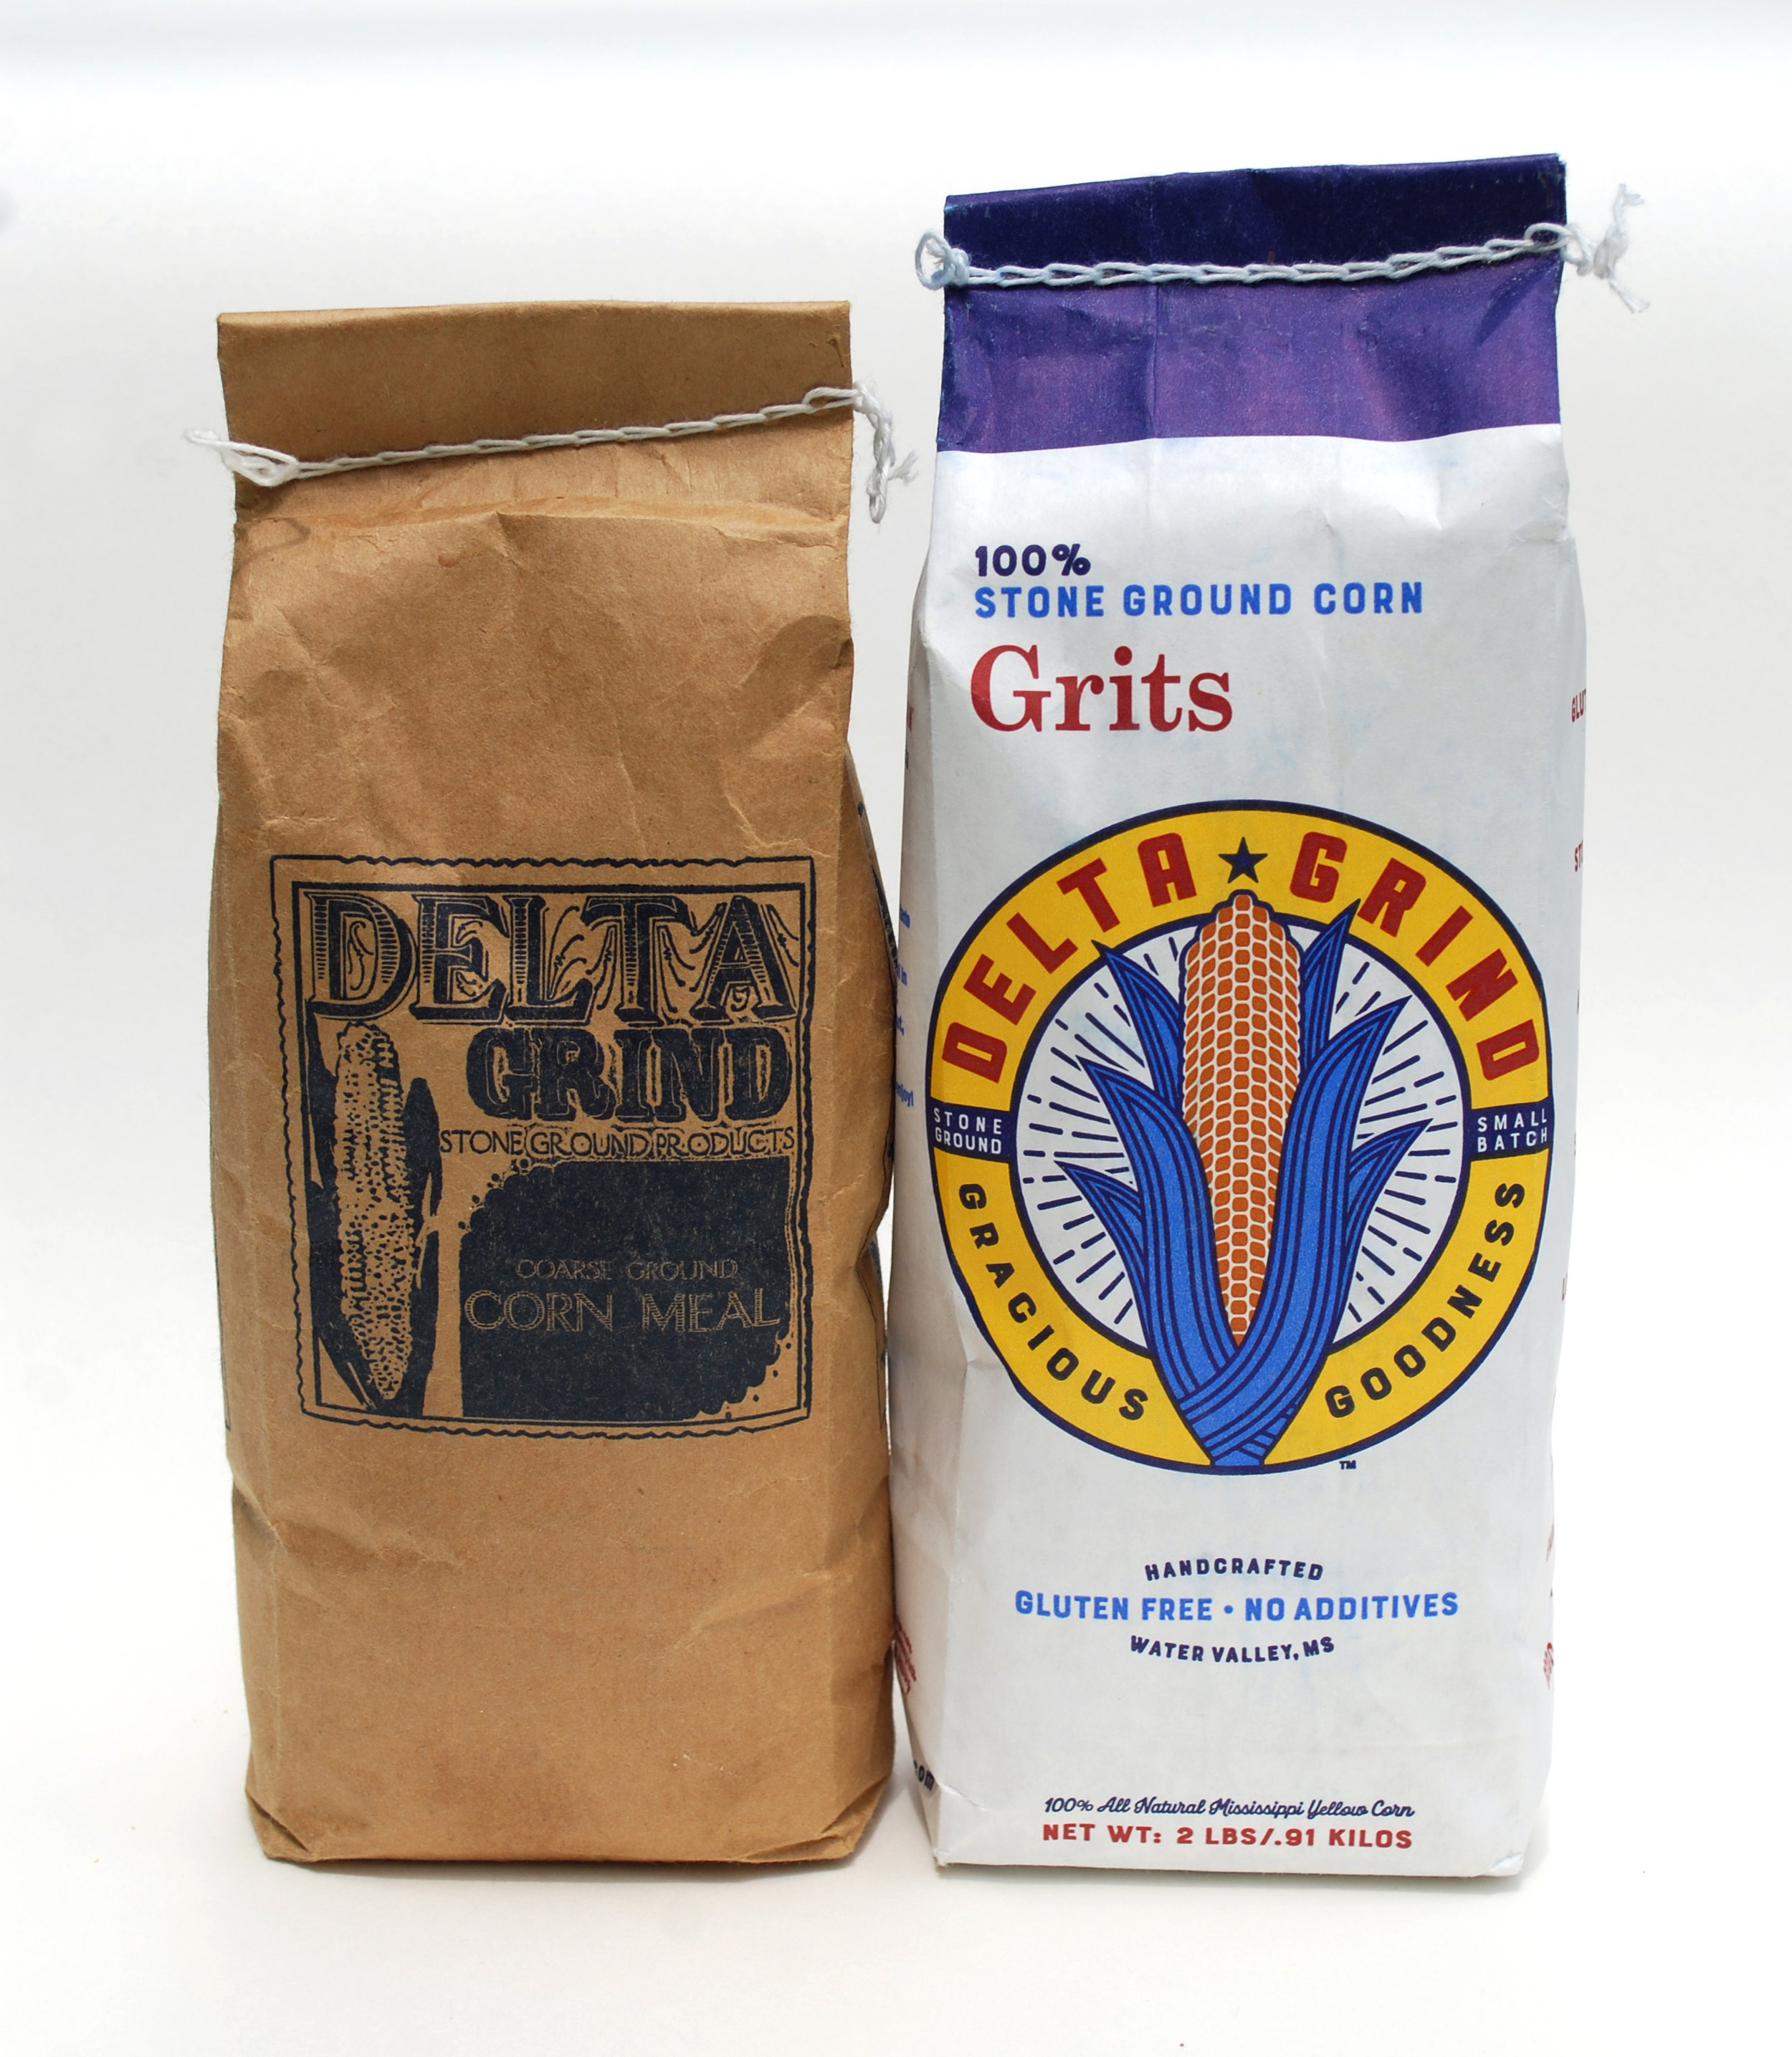  Delta Grind Stone Ground Products  Before &amp; After Delta Grind packaging  Creative and design by Chuck Mitchell  for Delta Grind Stone Ground Products, LLC 